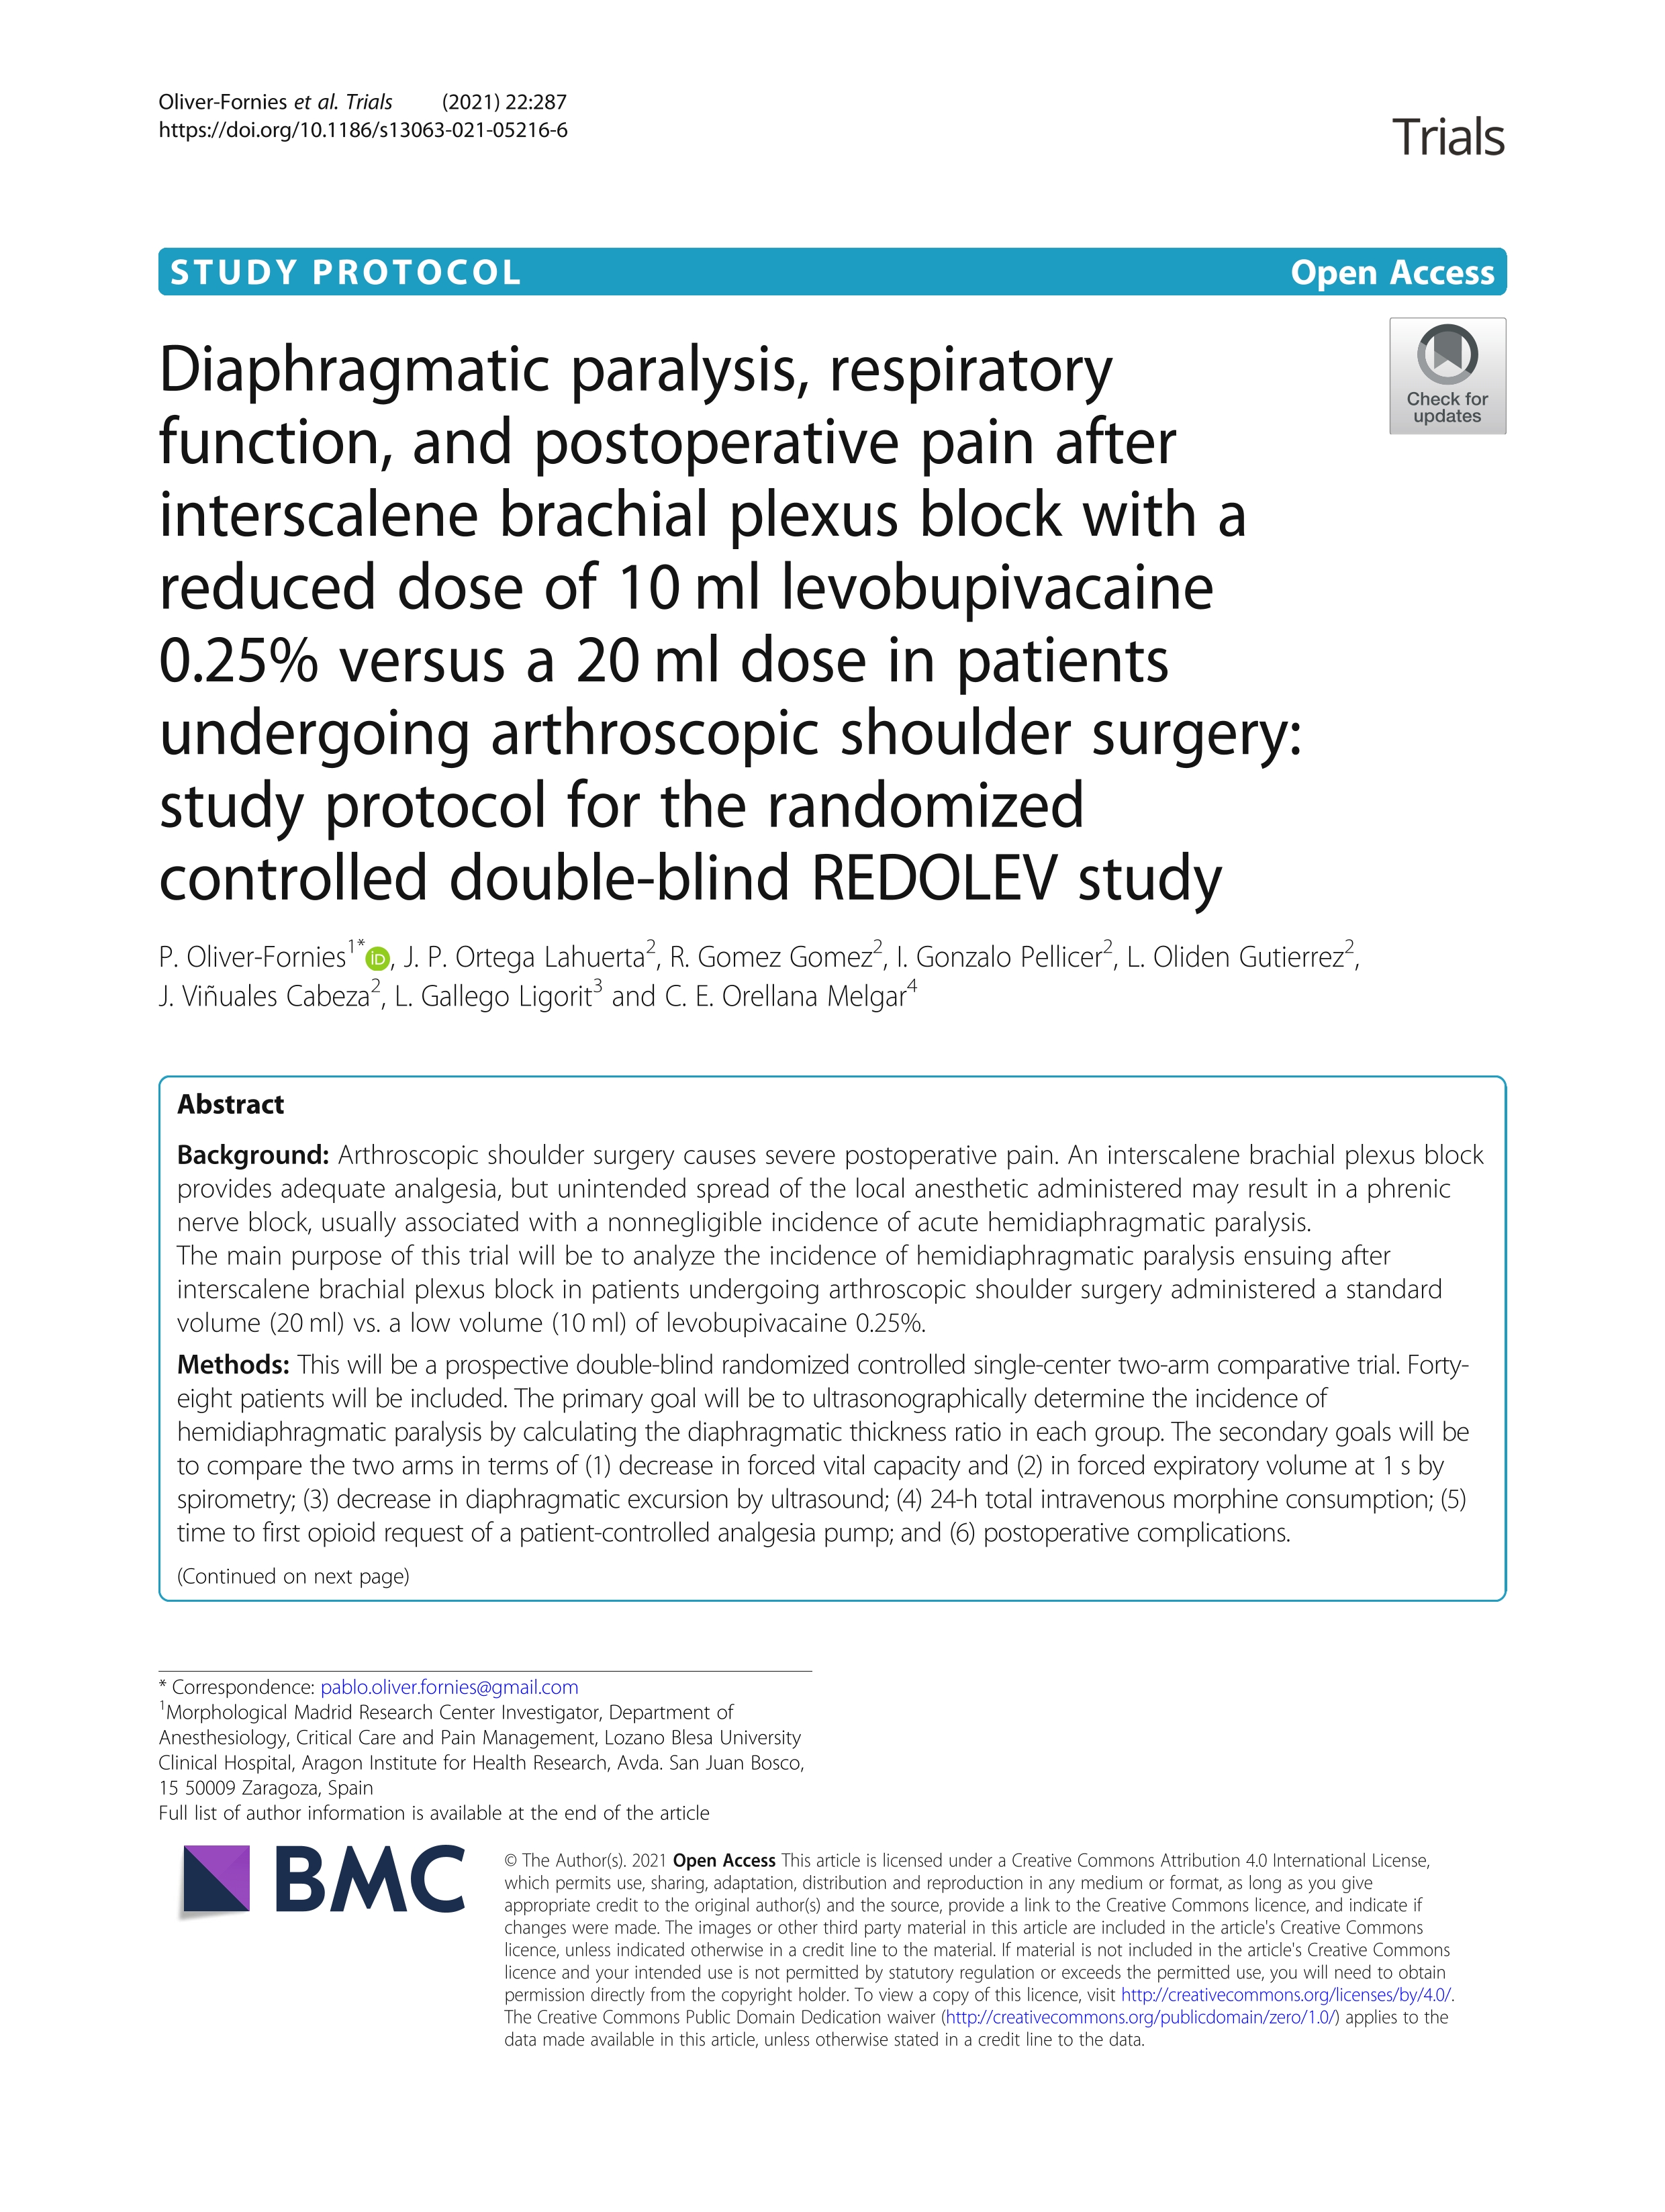 Diaphragmatic paralysis, respiratory function, and postoperative pain after interscalene brachial plexus block with a reduced dose of 10 ml levobupivacaine 0.25% versus a 20 ml dose in patients undergoing arthroscopic shoulder surgery: study protocol for the randomized controlled double-blind Redole